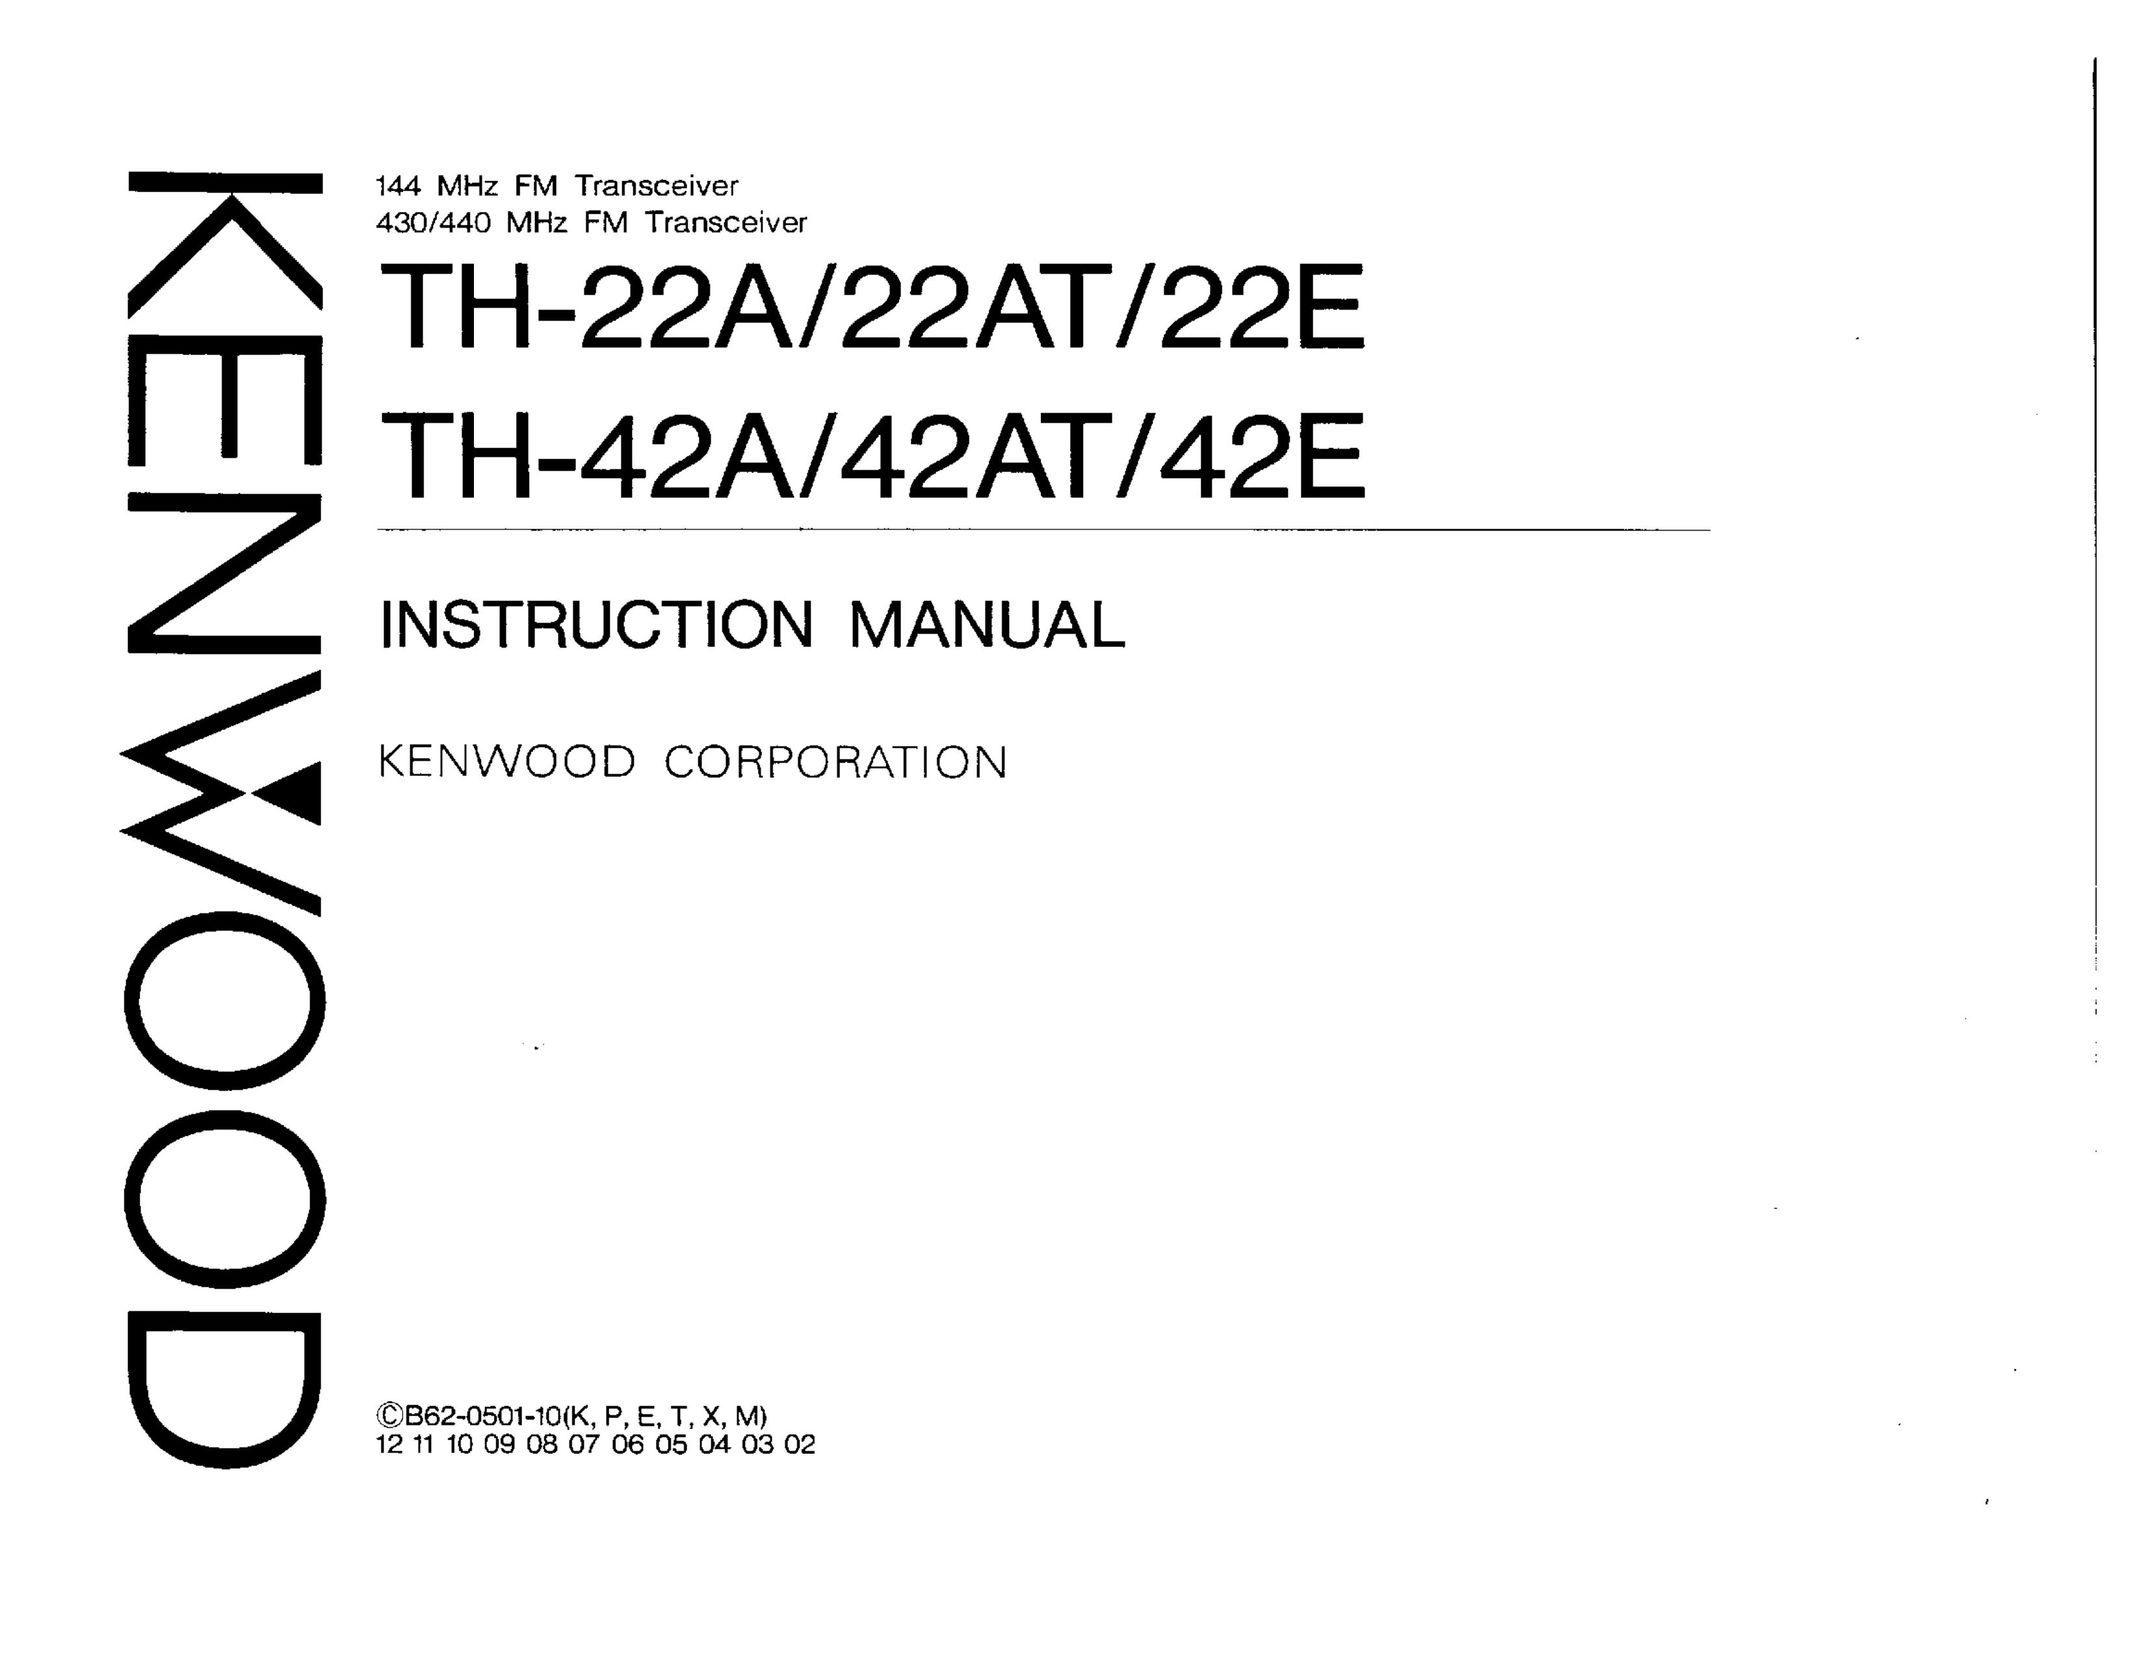 Kenwood 22AT Home Security System User Manual